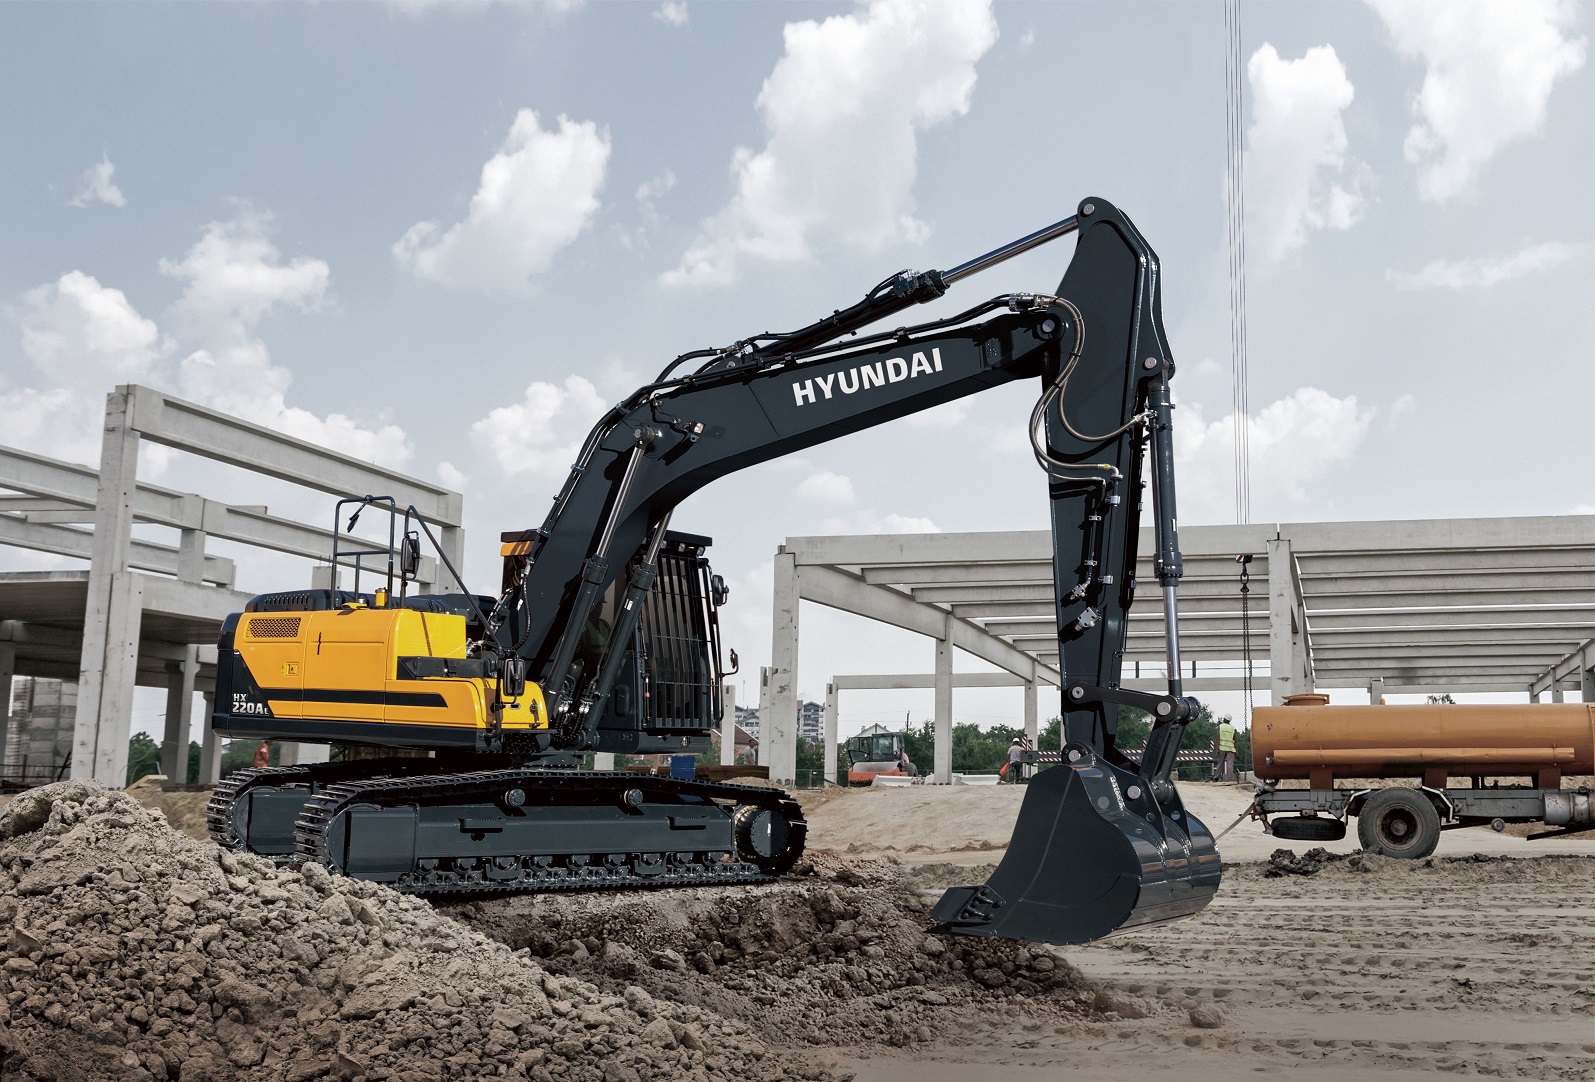 The HX220AL is one of Hyundai’s first Stage V ready machines